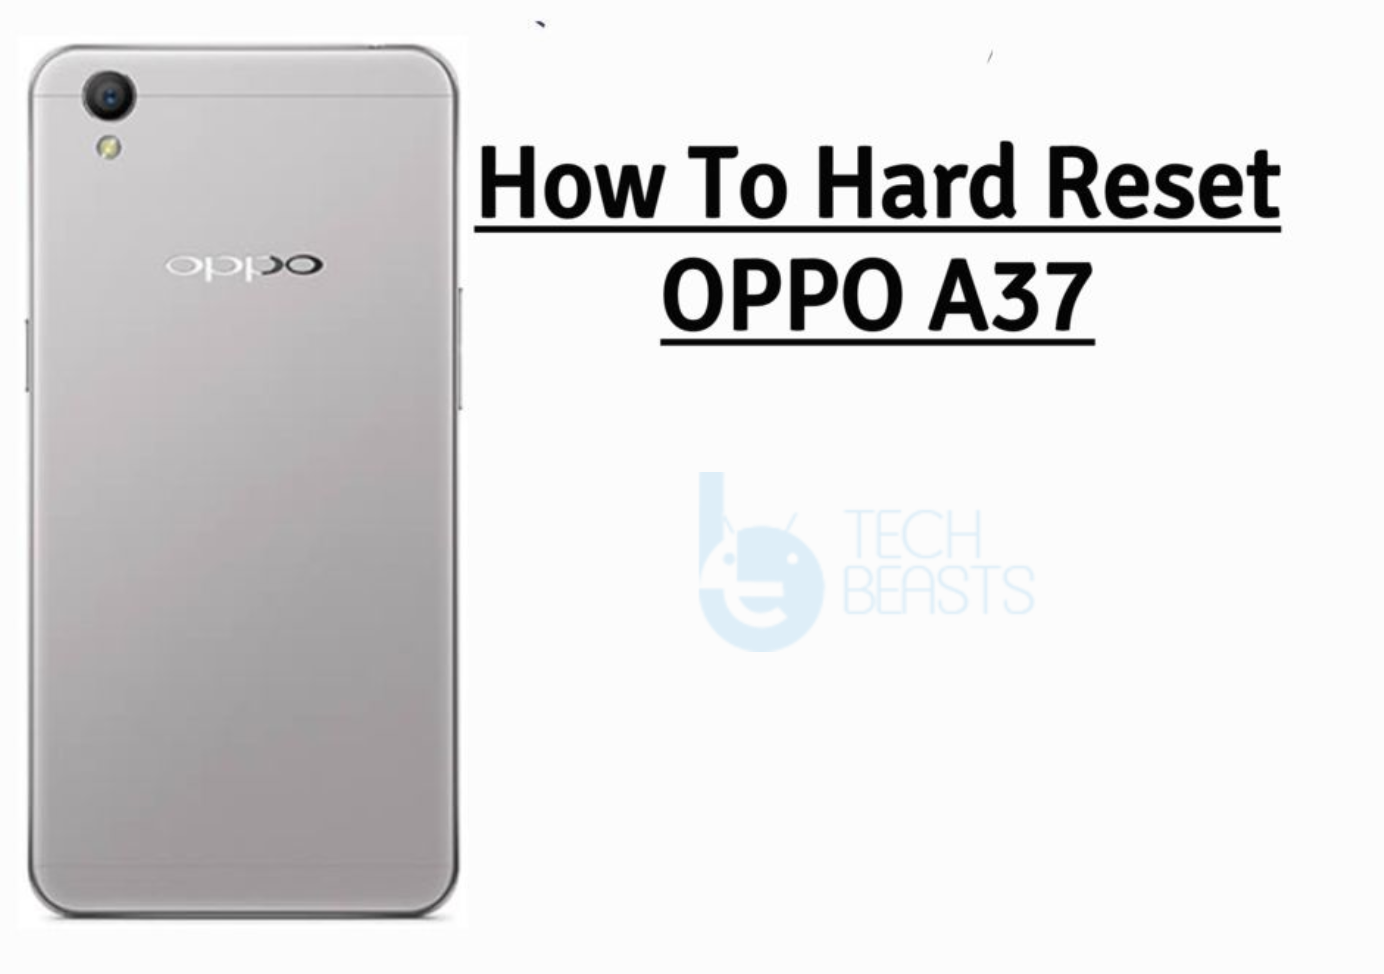 Hard Reset OPPO A37